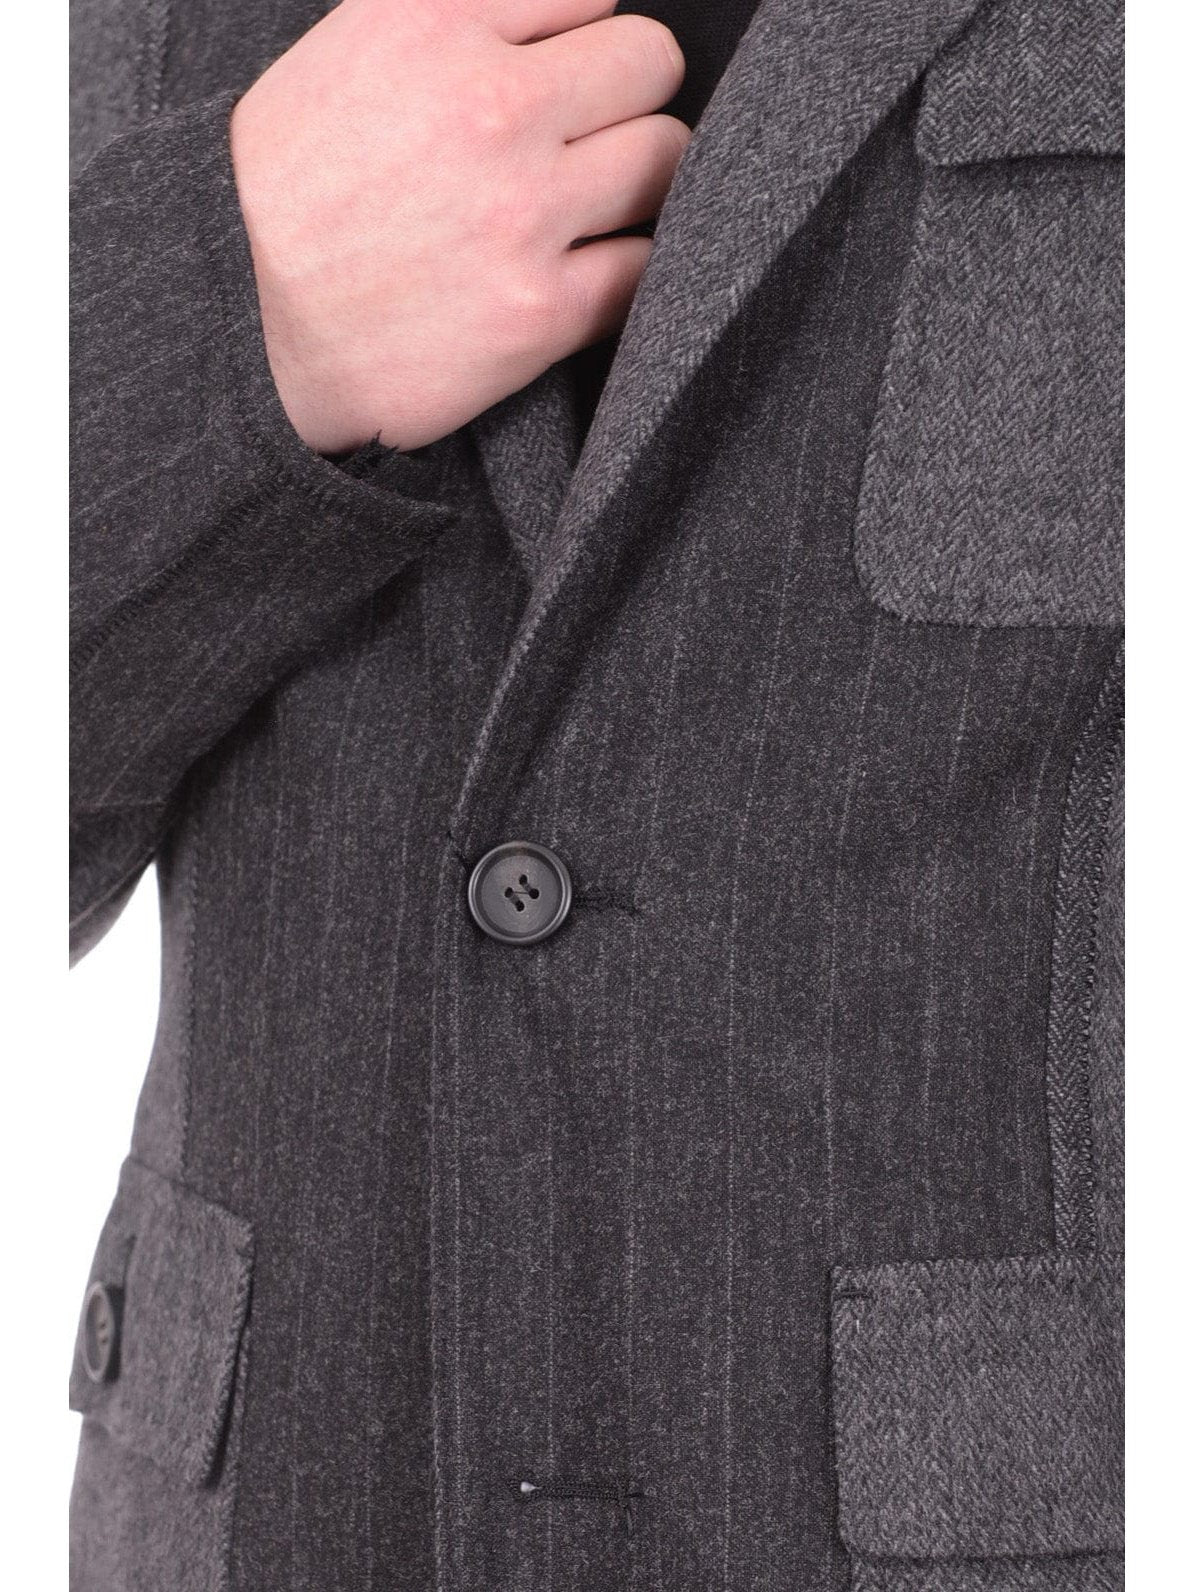 Napoli BLAZERS Mens Extra Slim Fit Napoli Gray Patchwork Unlined Unstructured Wool Sportcoat